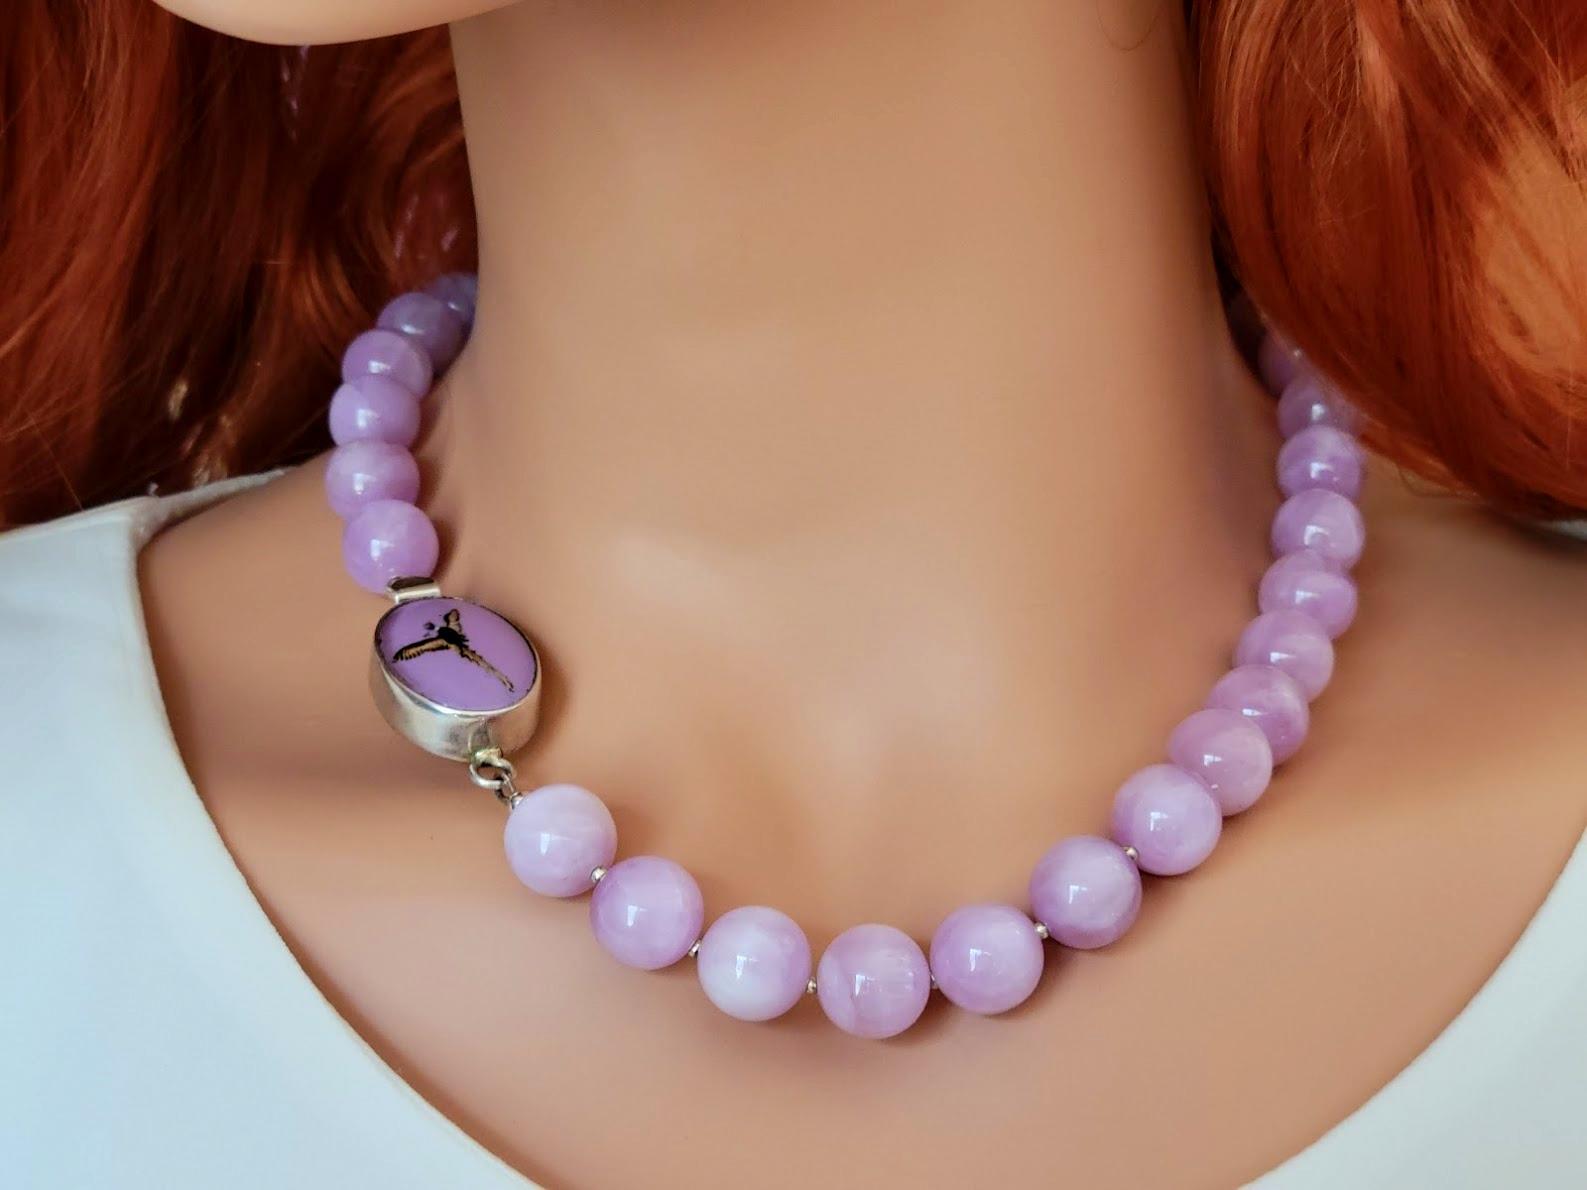 Women's Lavender Chatoyant Kunzite Necklace With Vintage Essex Crystal Clasp For Sale